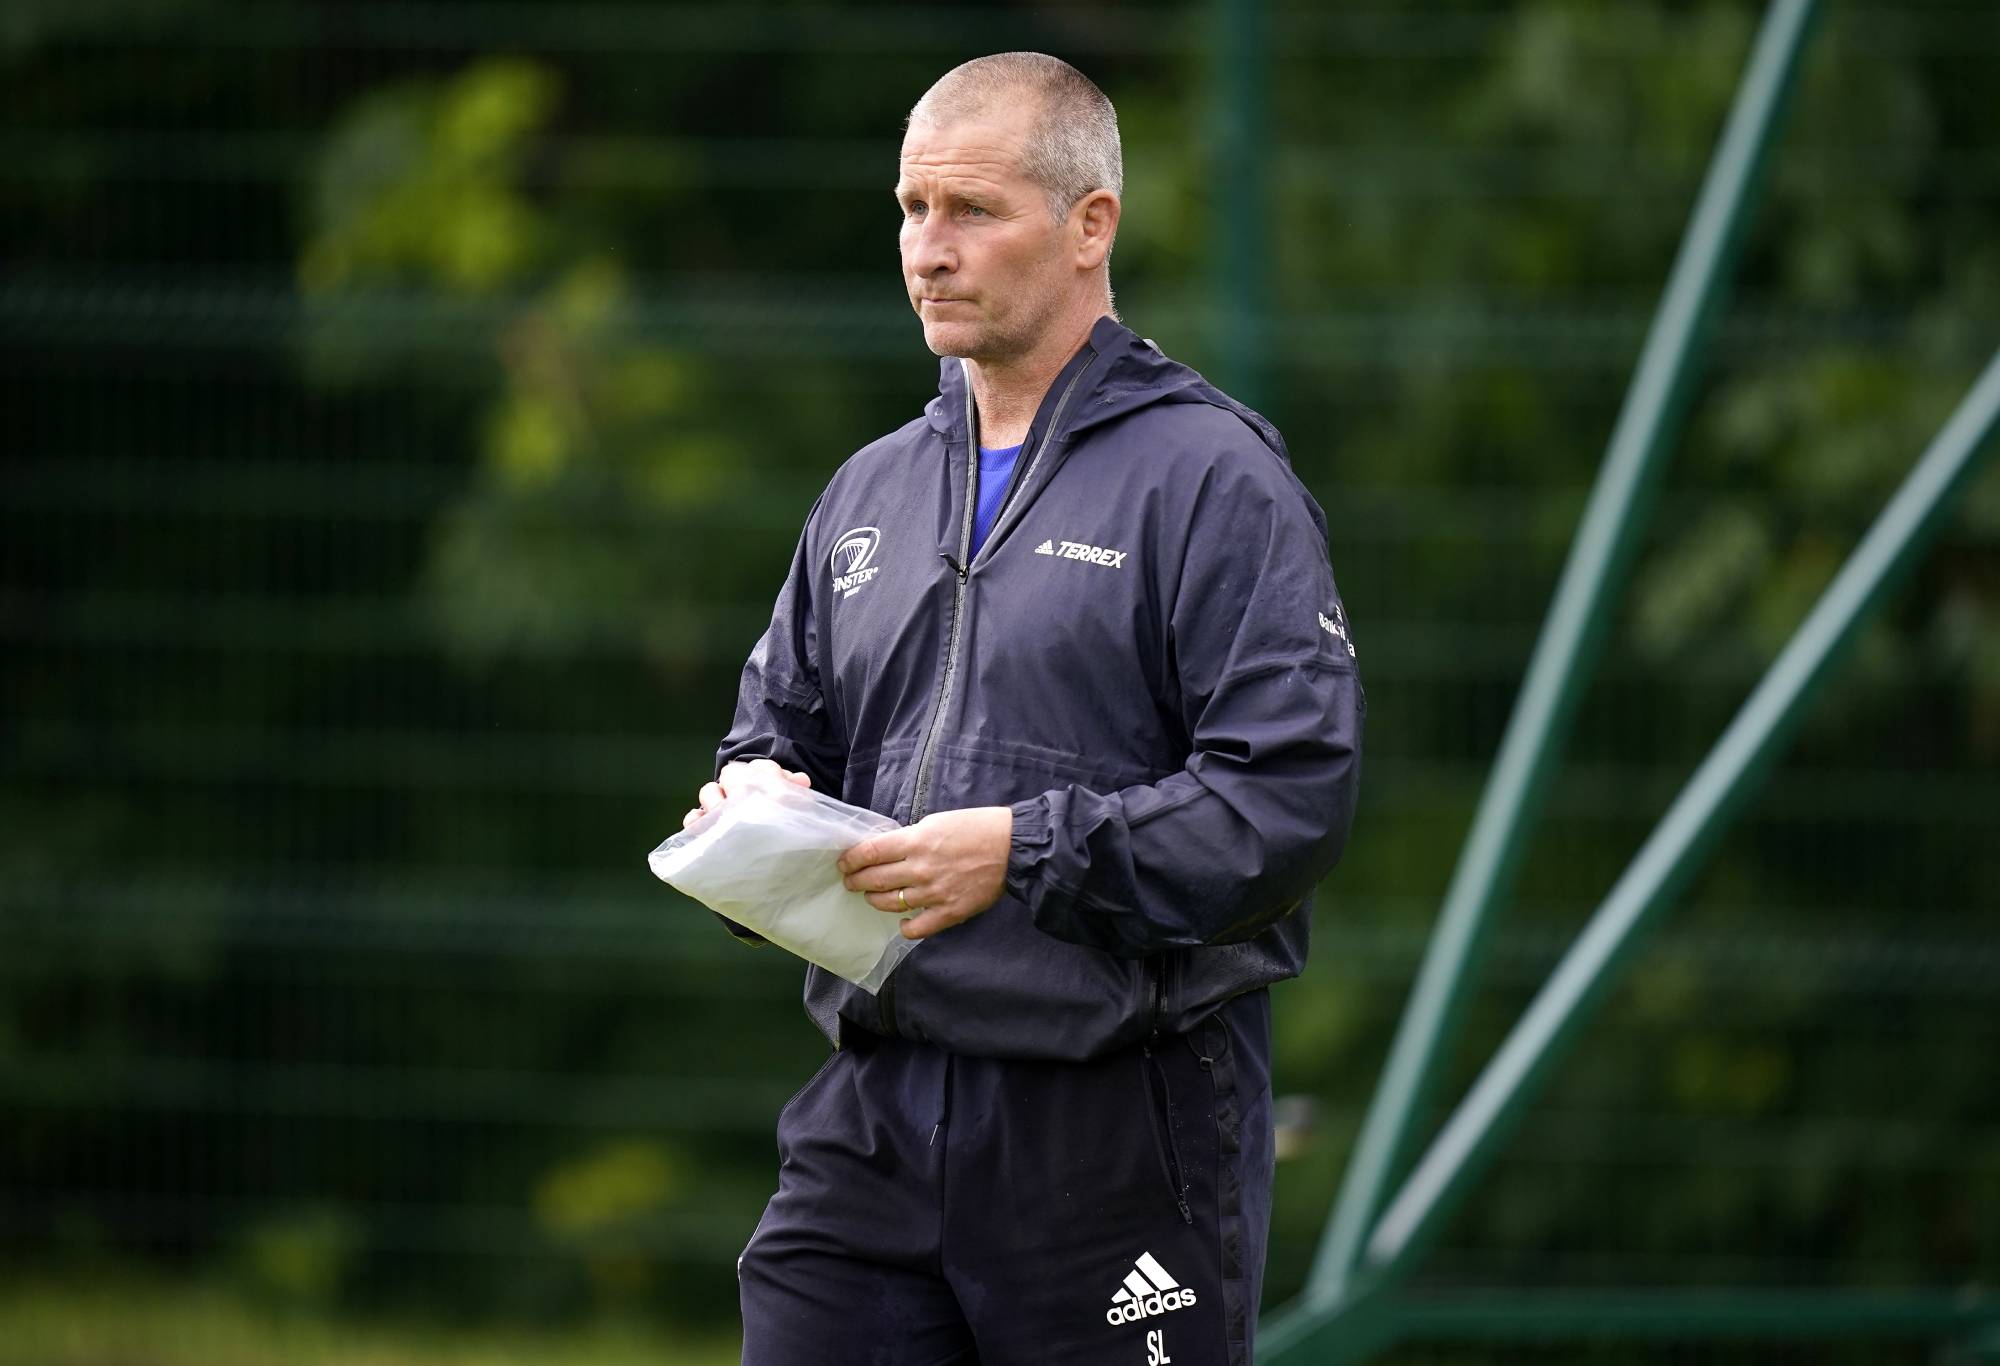 Leinster's senior coach Stuart Lancaster during a training session at the Leinster Rugby HQ, Rosemount, University College Dublin in Ireland. Picture date: Monday May 23, 2022. (Photo by Niall Carson/PA Images via Getty Images)